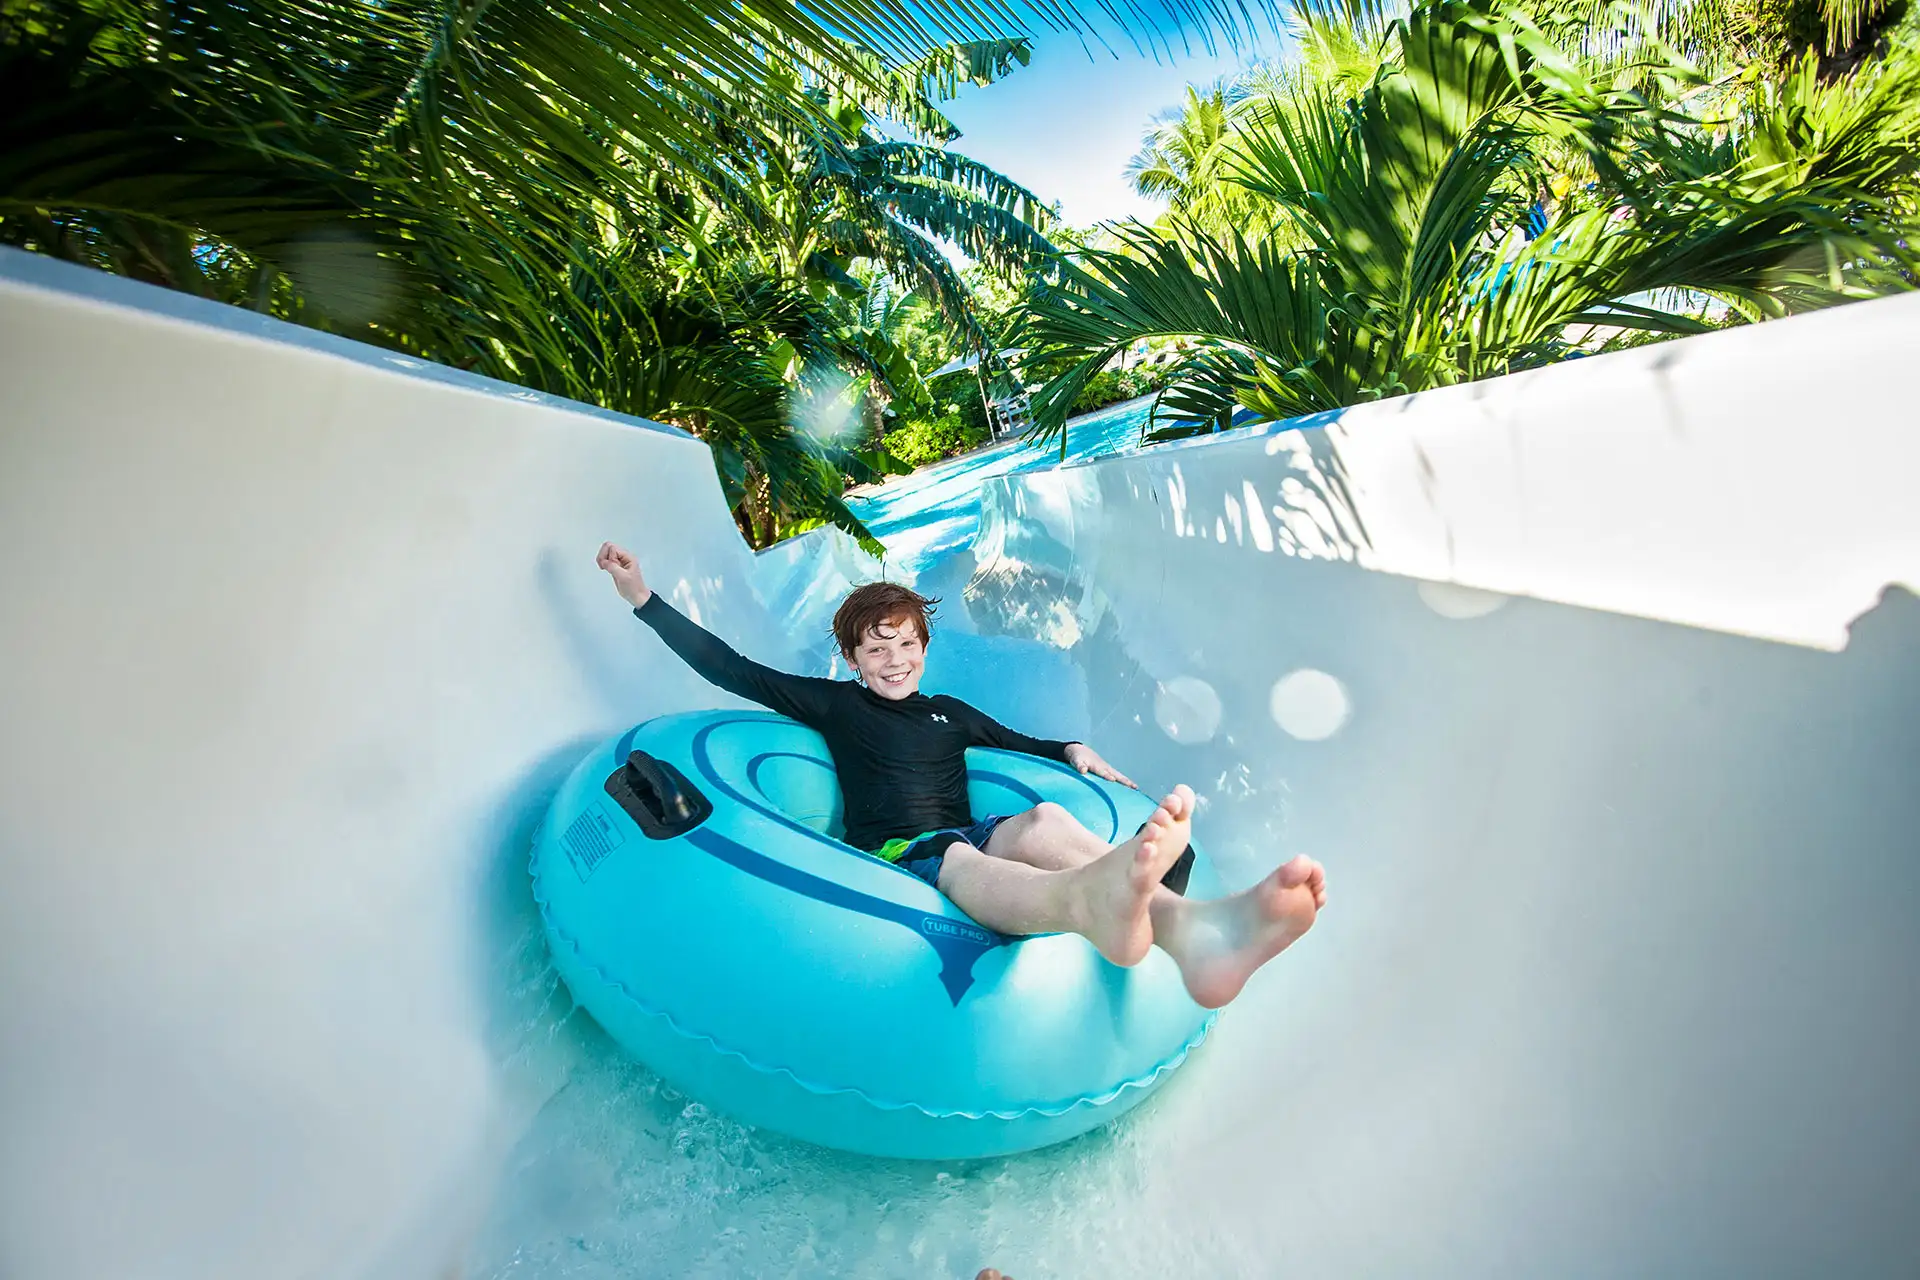 Boy on Waterslide at Beaches Turks and Caicos; Courtesy of Beaches Turks and Caicos